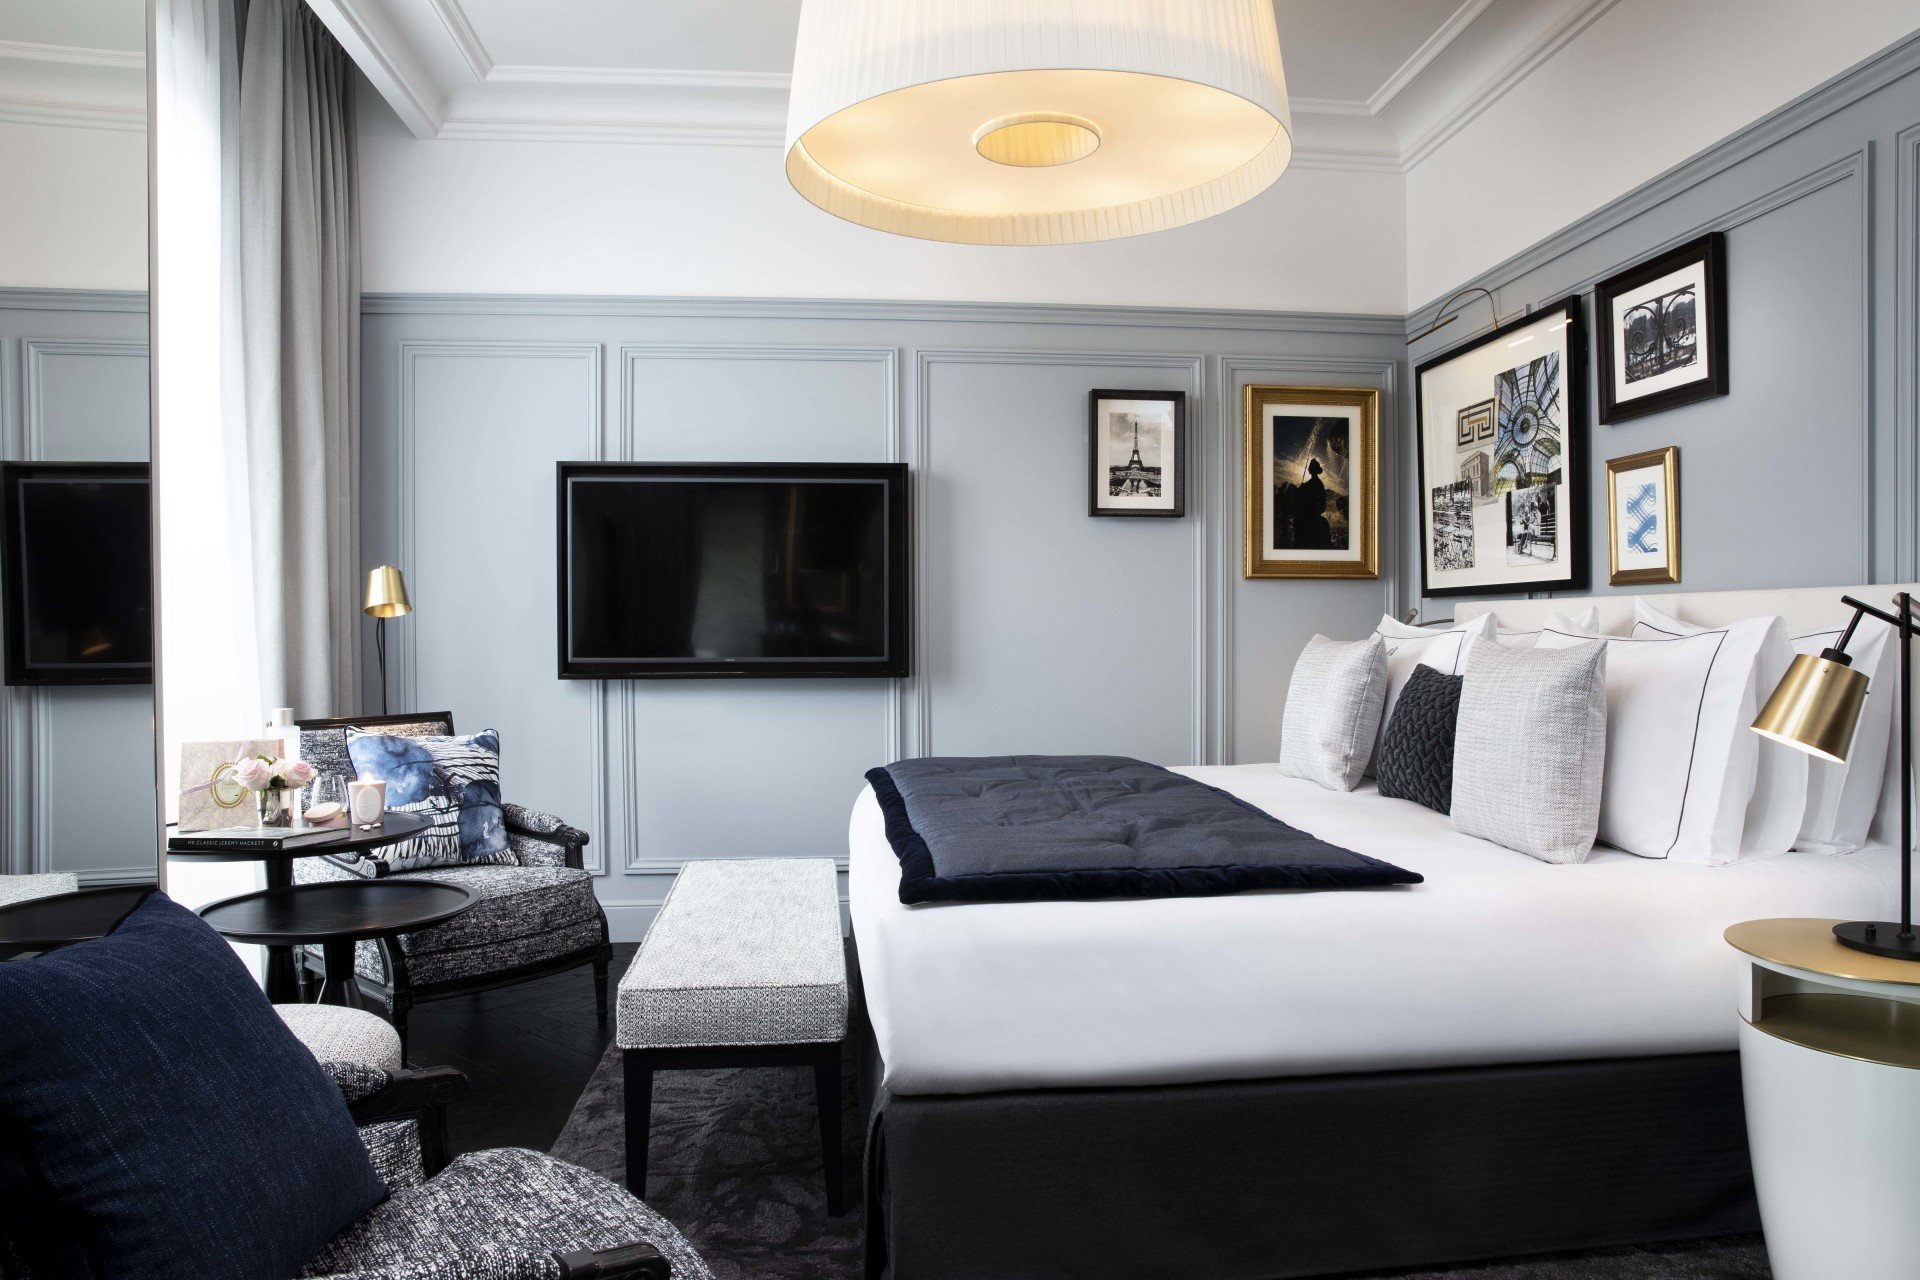 Hotel and Spa Le Damantin Paris - luxury hotel designed by the interior design studio jean-philippe nuel - design room equipped with bed, design armchair, open bathroom - artworks, paintings